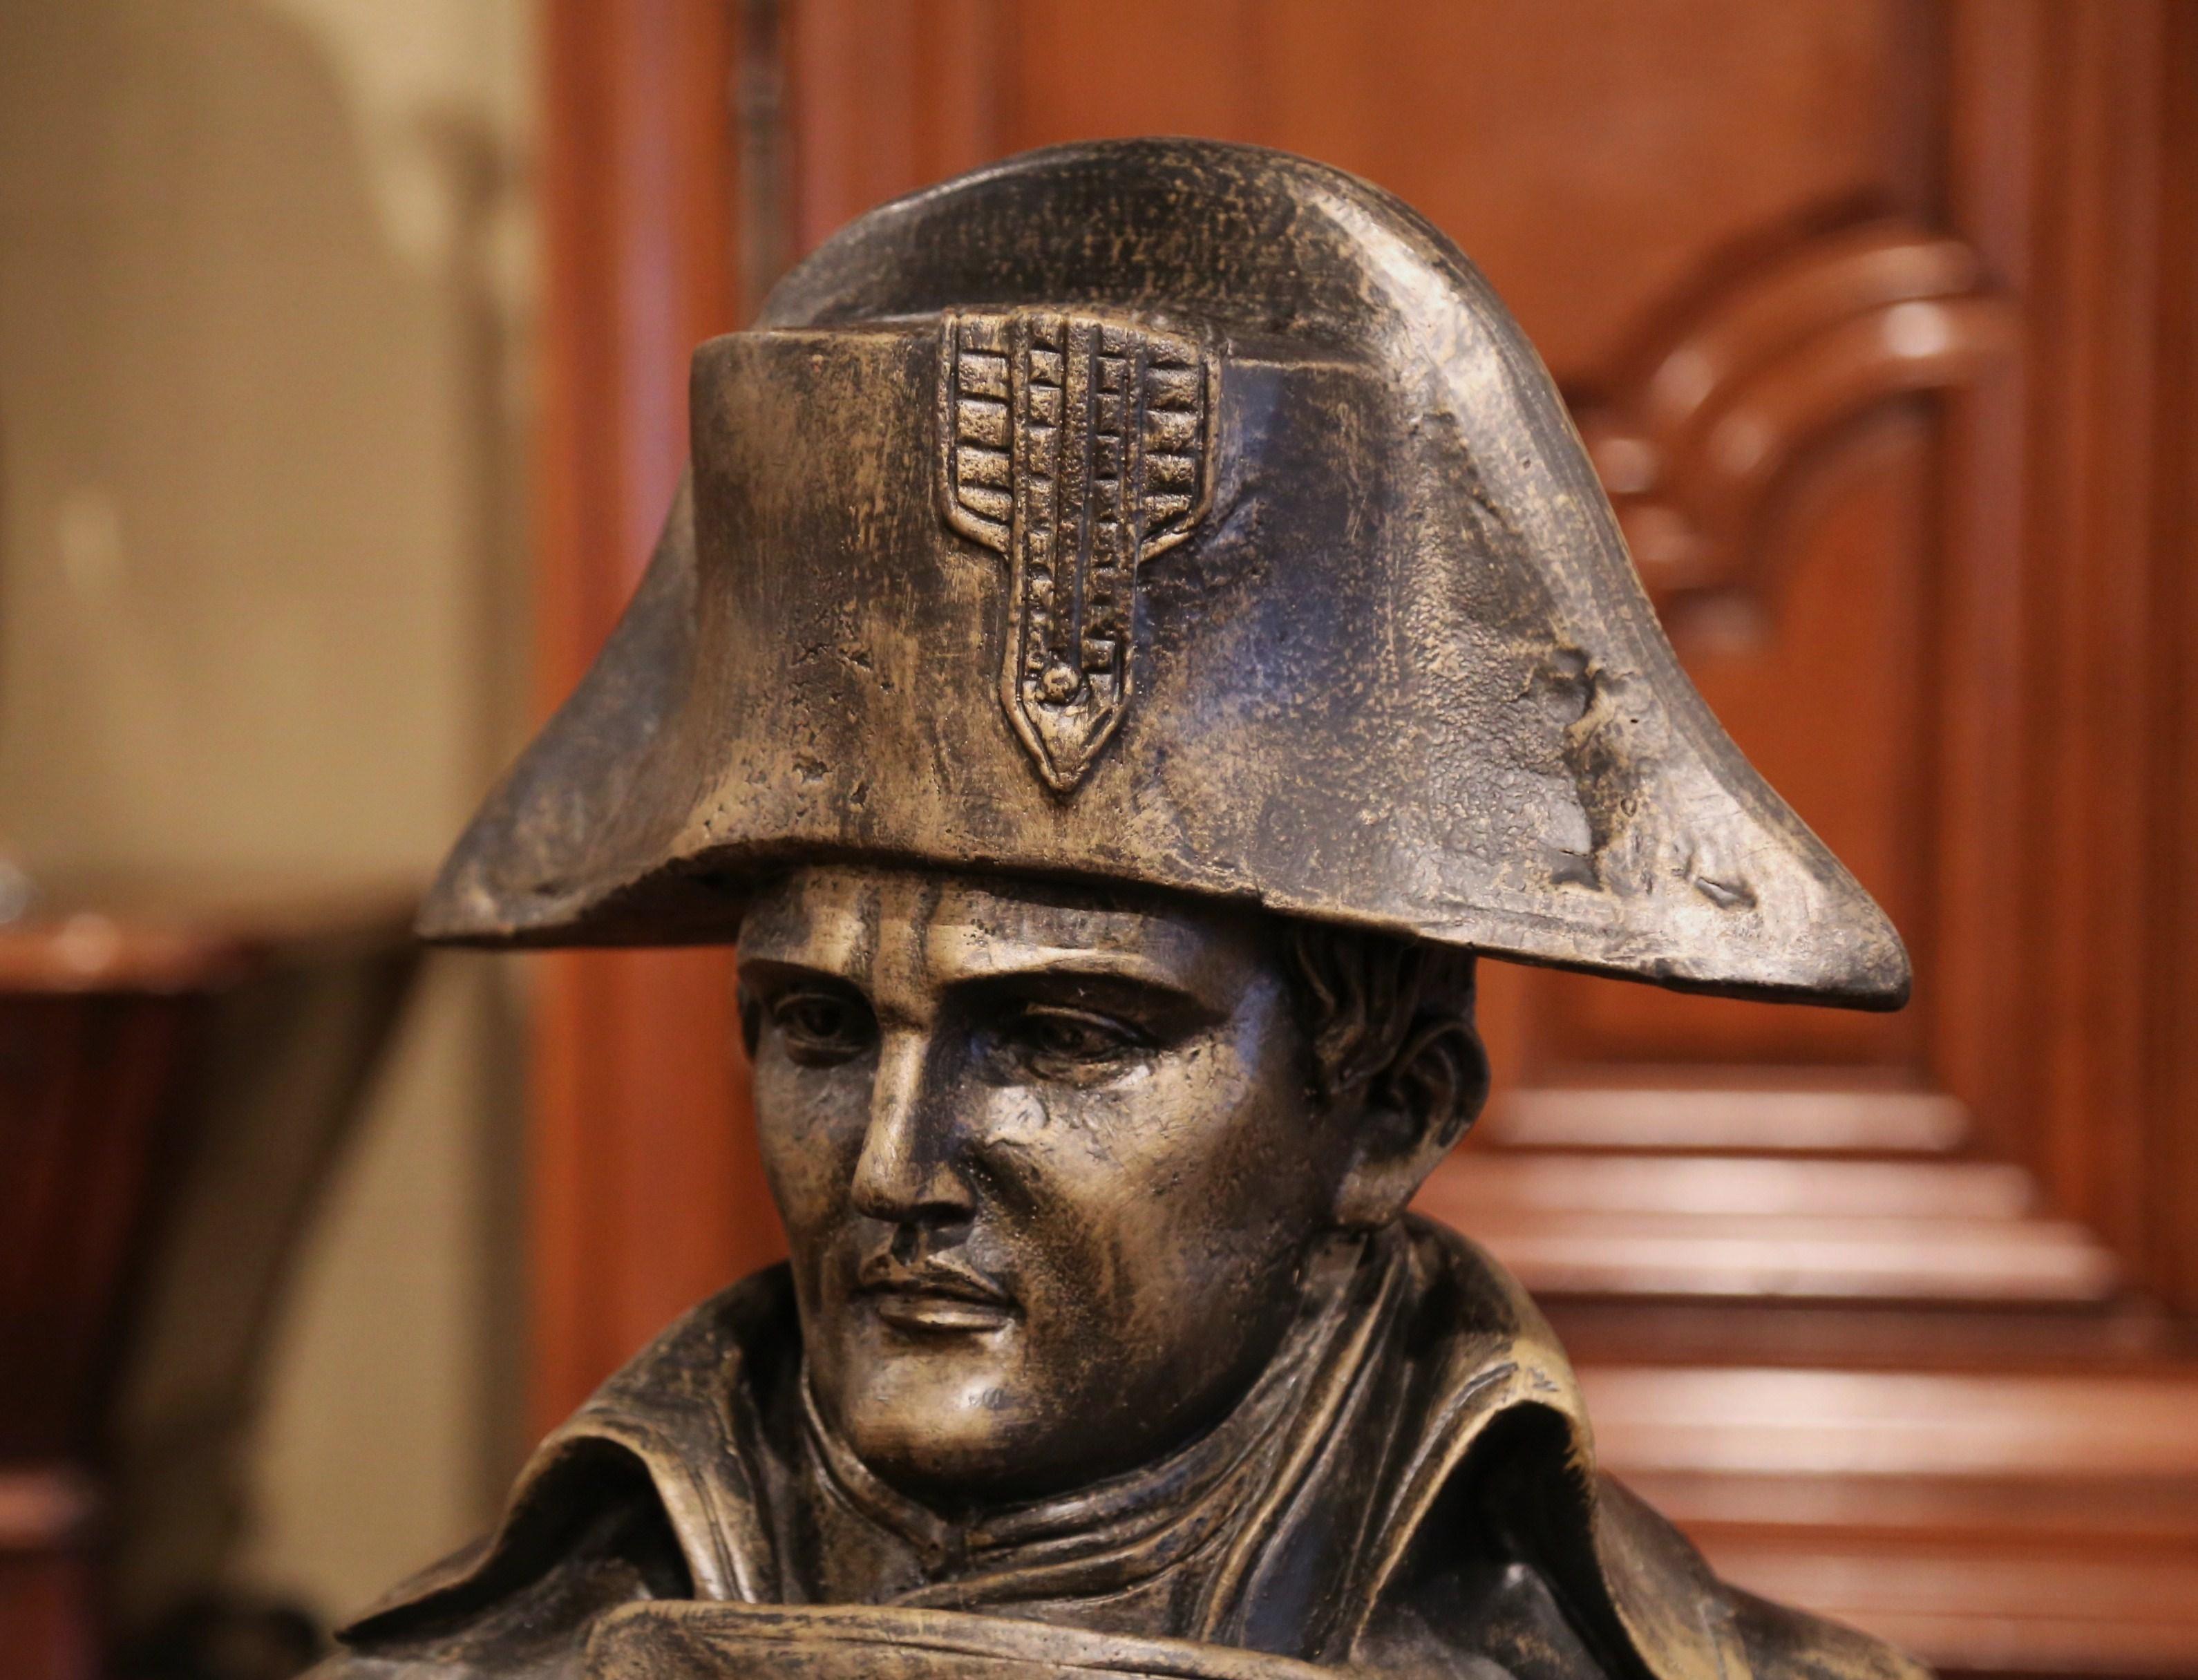 This large antique bust was found in Versailles France; created circa 1920, the tall sculpture depicts the French Emperor Napoleon I over the famous eagle emblem. He is features with his traditional bicorne hat and a large leather like jacket over